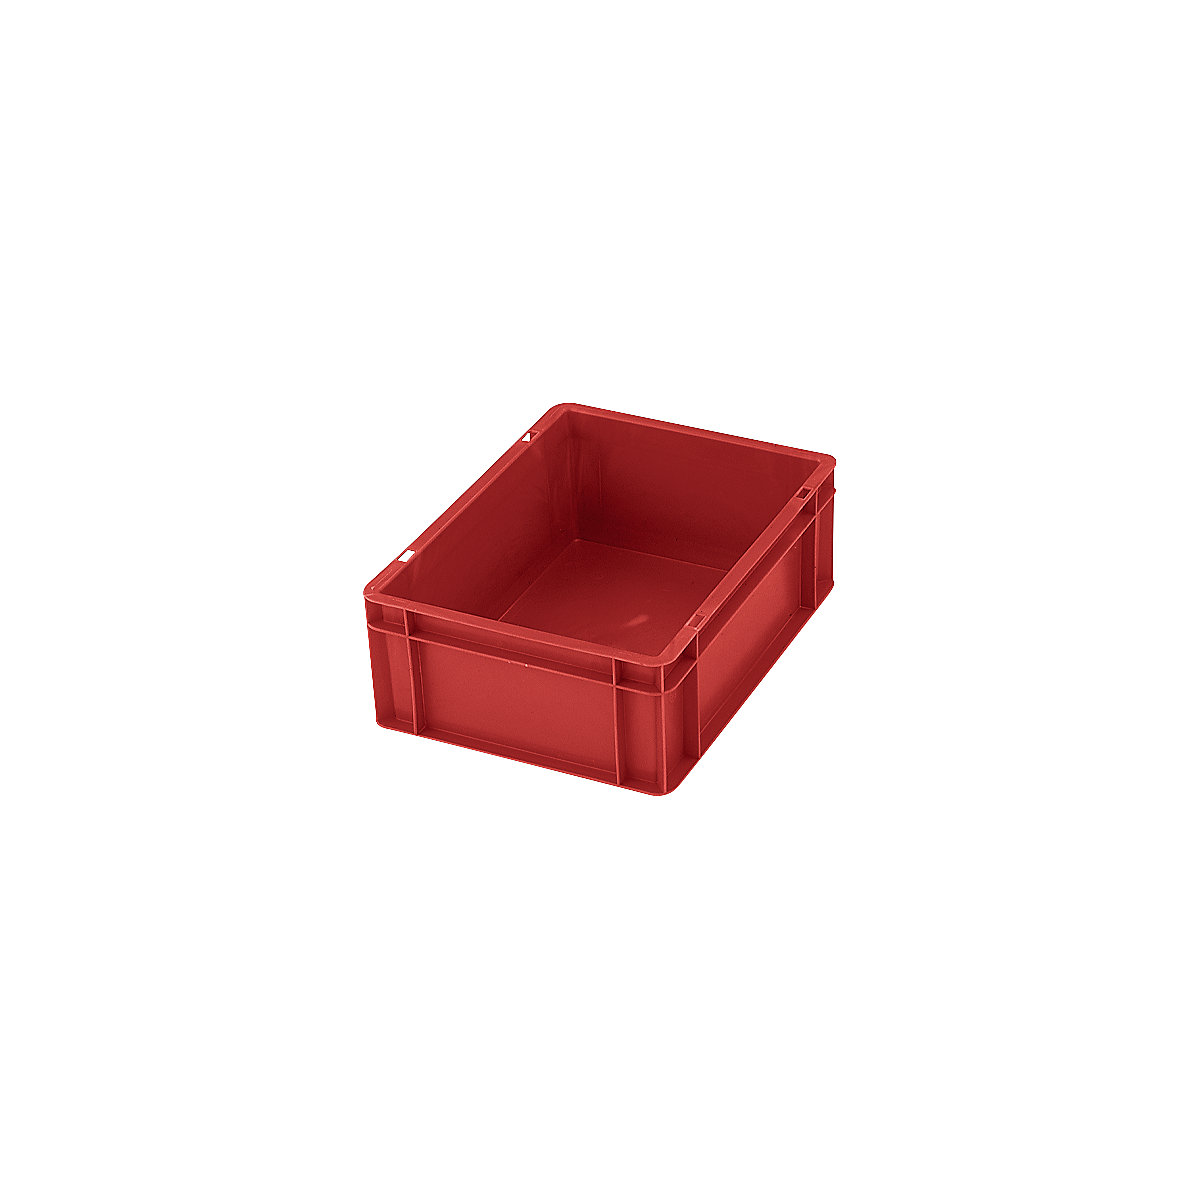 Euro stacking container, closed walls and base, LxWxH 600 x 400 x 75 mm, red, pack of 5-6